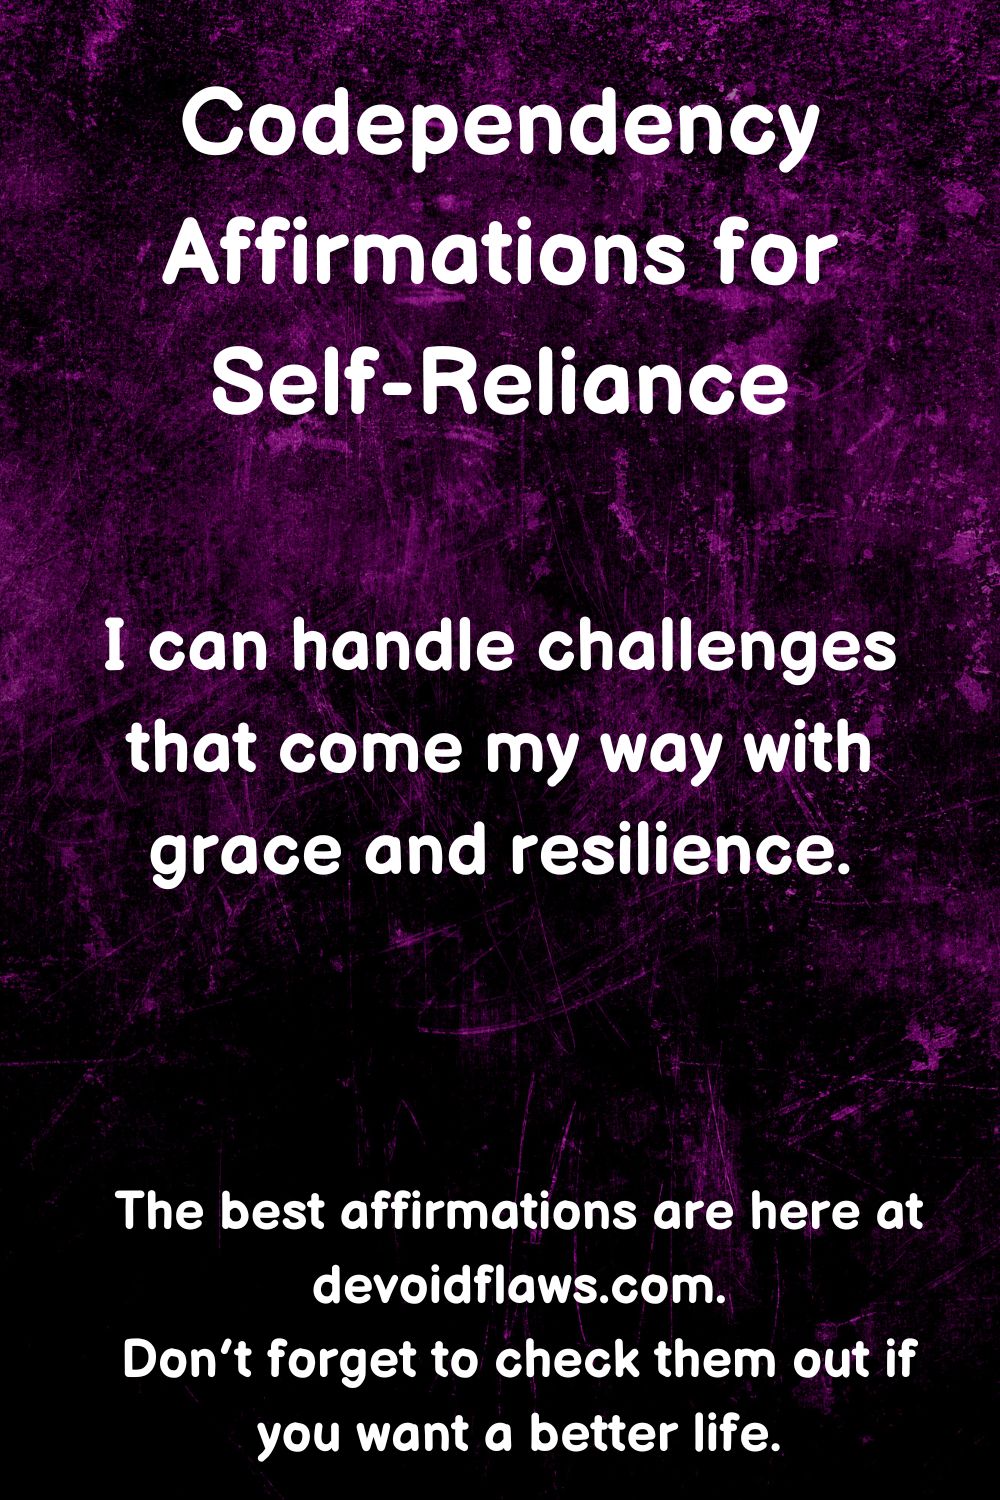 codependency affirmation for self-reliance